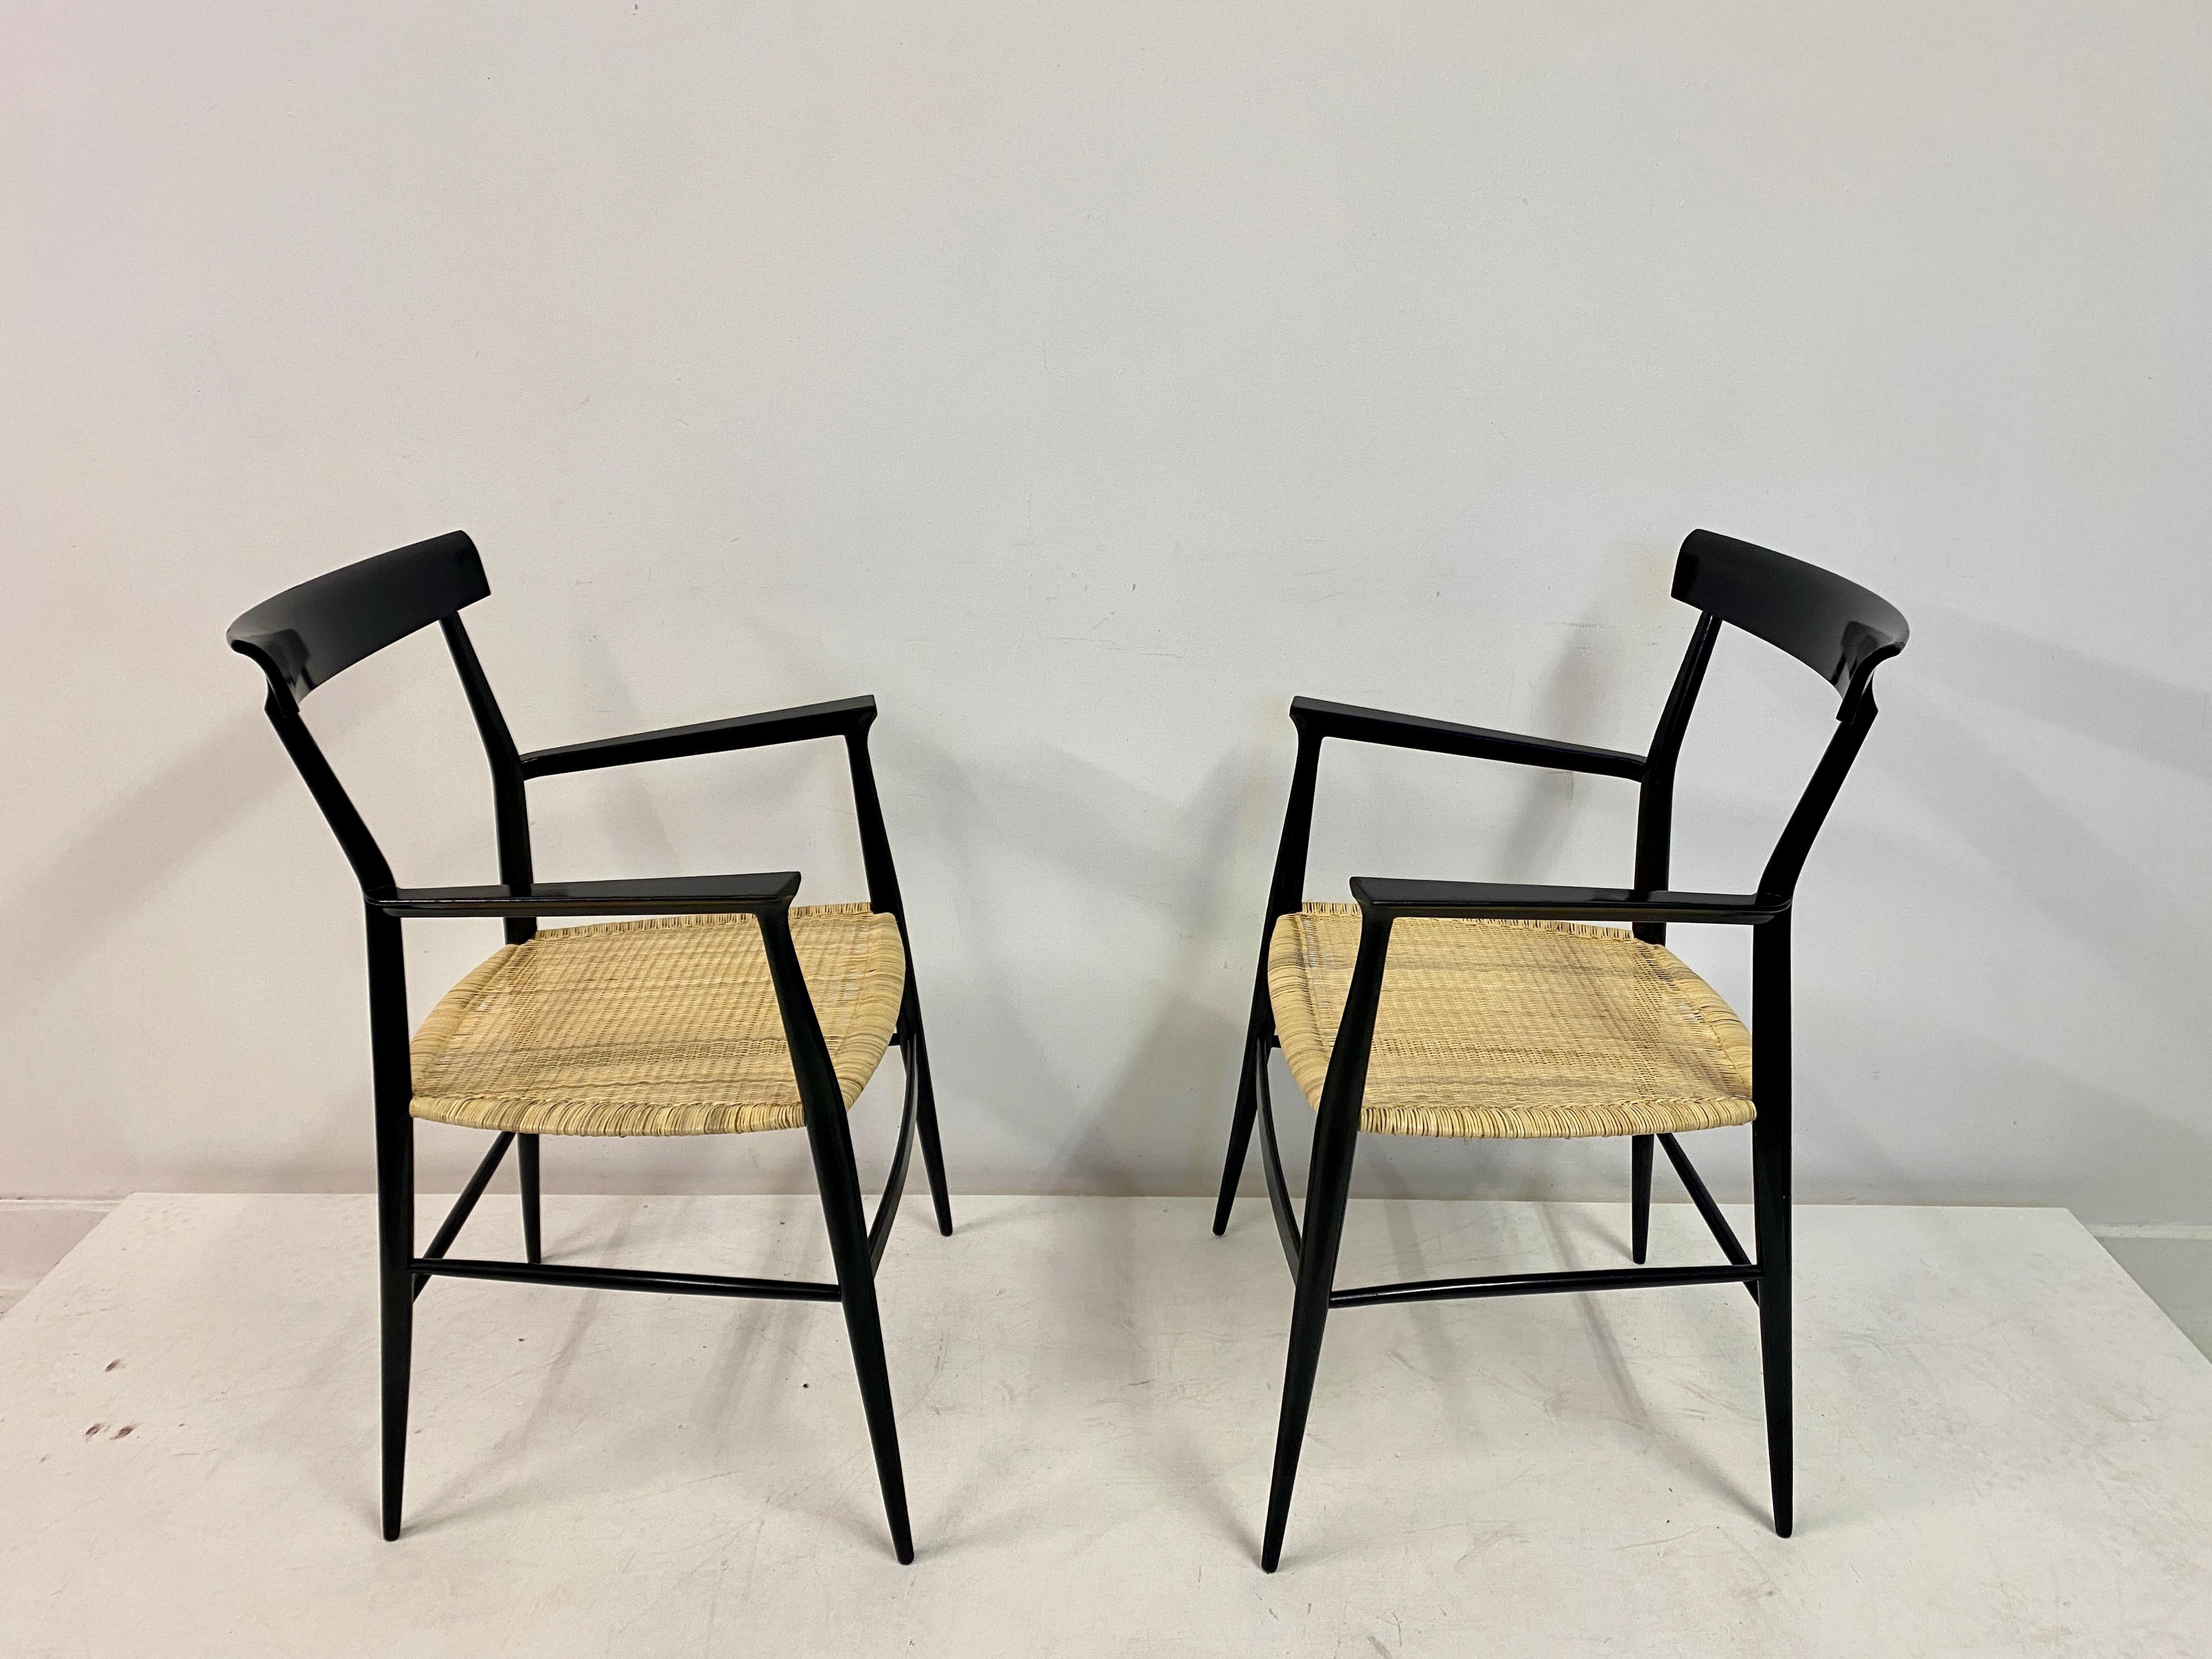 Pair of 1950s Tigullina Chairs by Colombo Sanguineti For Sale 4